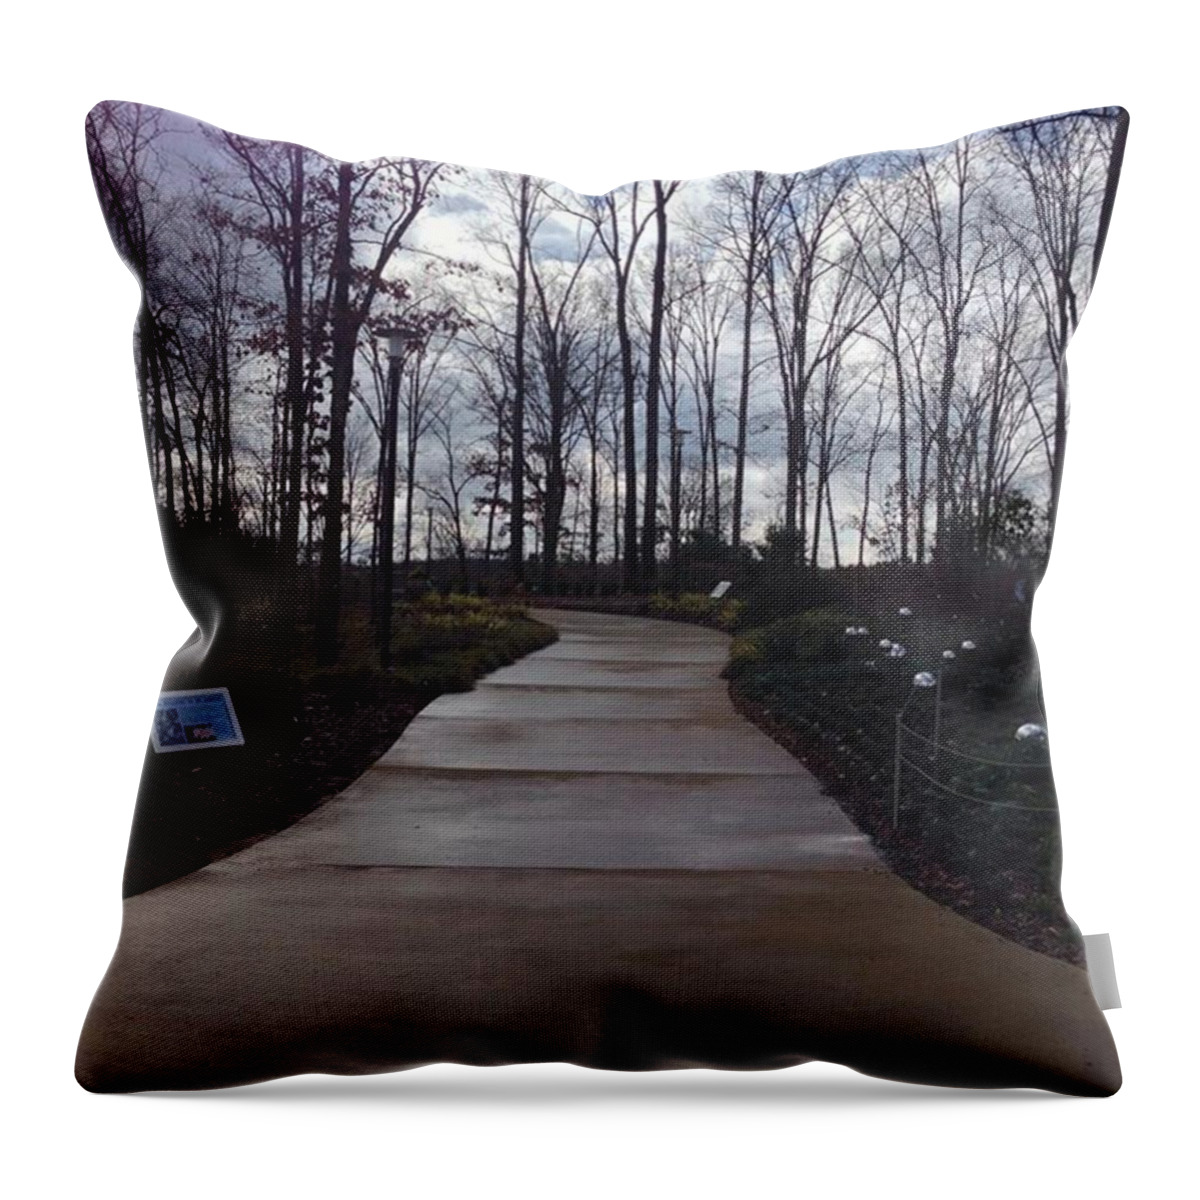  Throw Pillow featuring the photograph Winter At The Gardens by Daniel Eskridge